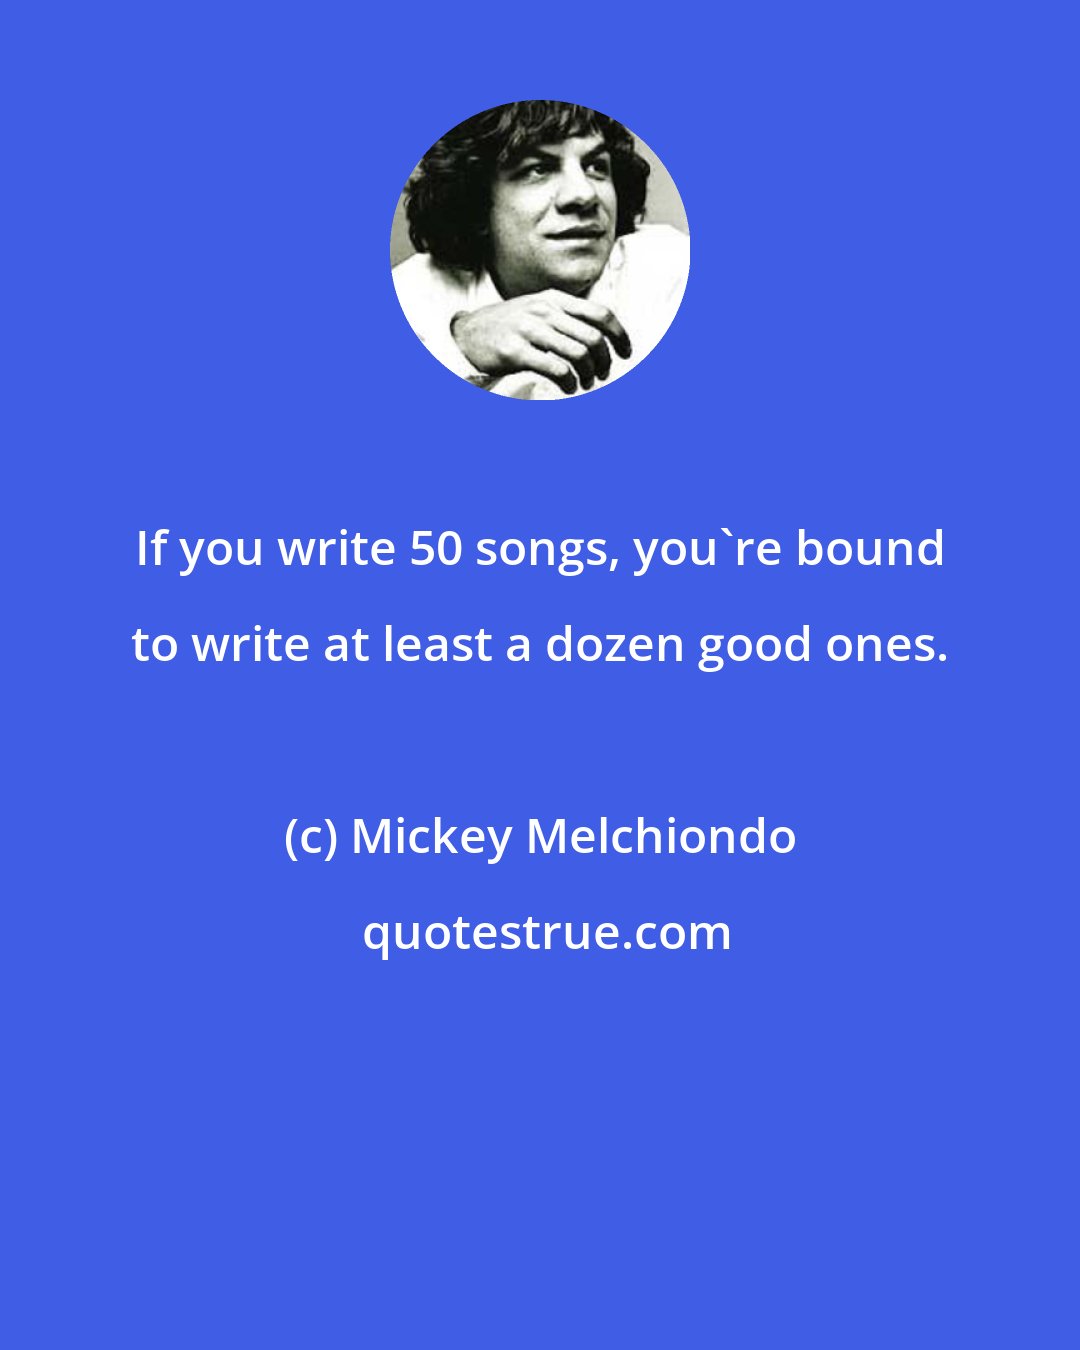 Mickey Melchiondo: If you write 50 songs, you're bound to write at least a dozen good ones.